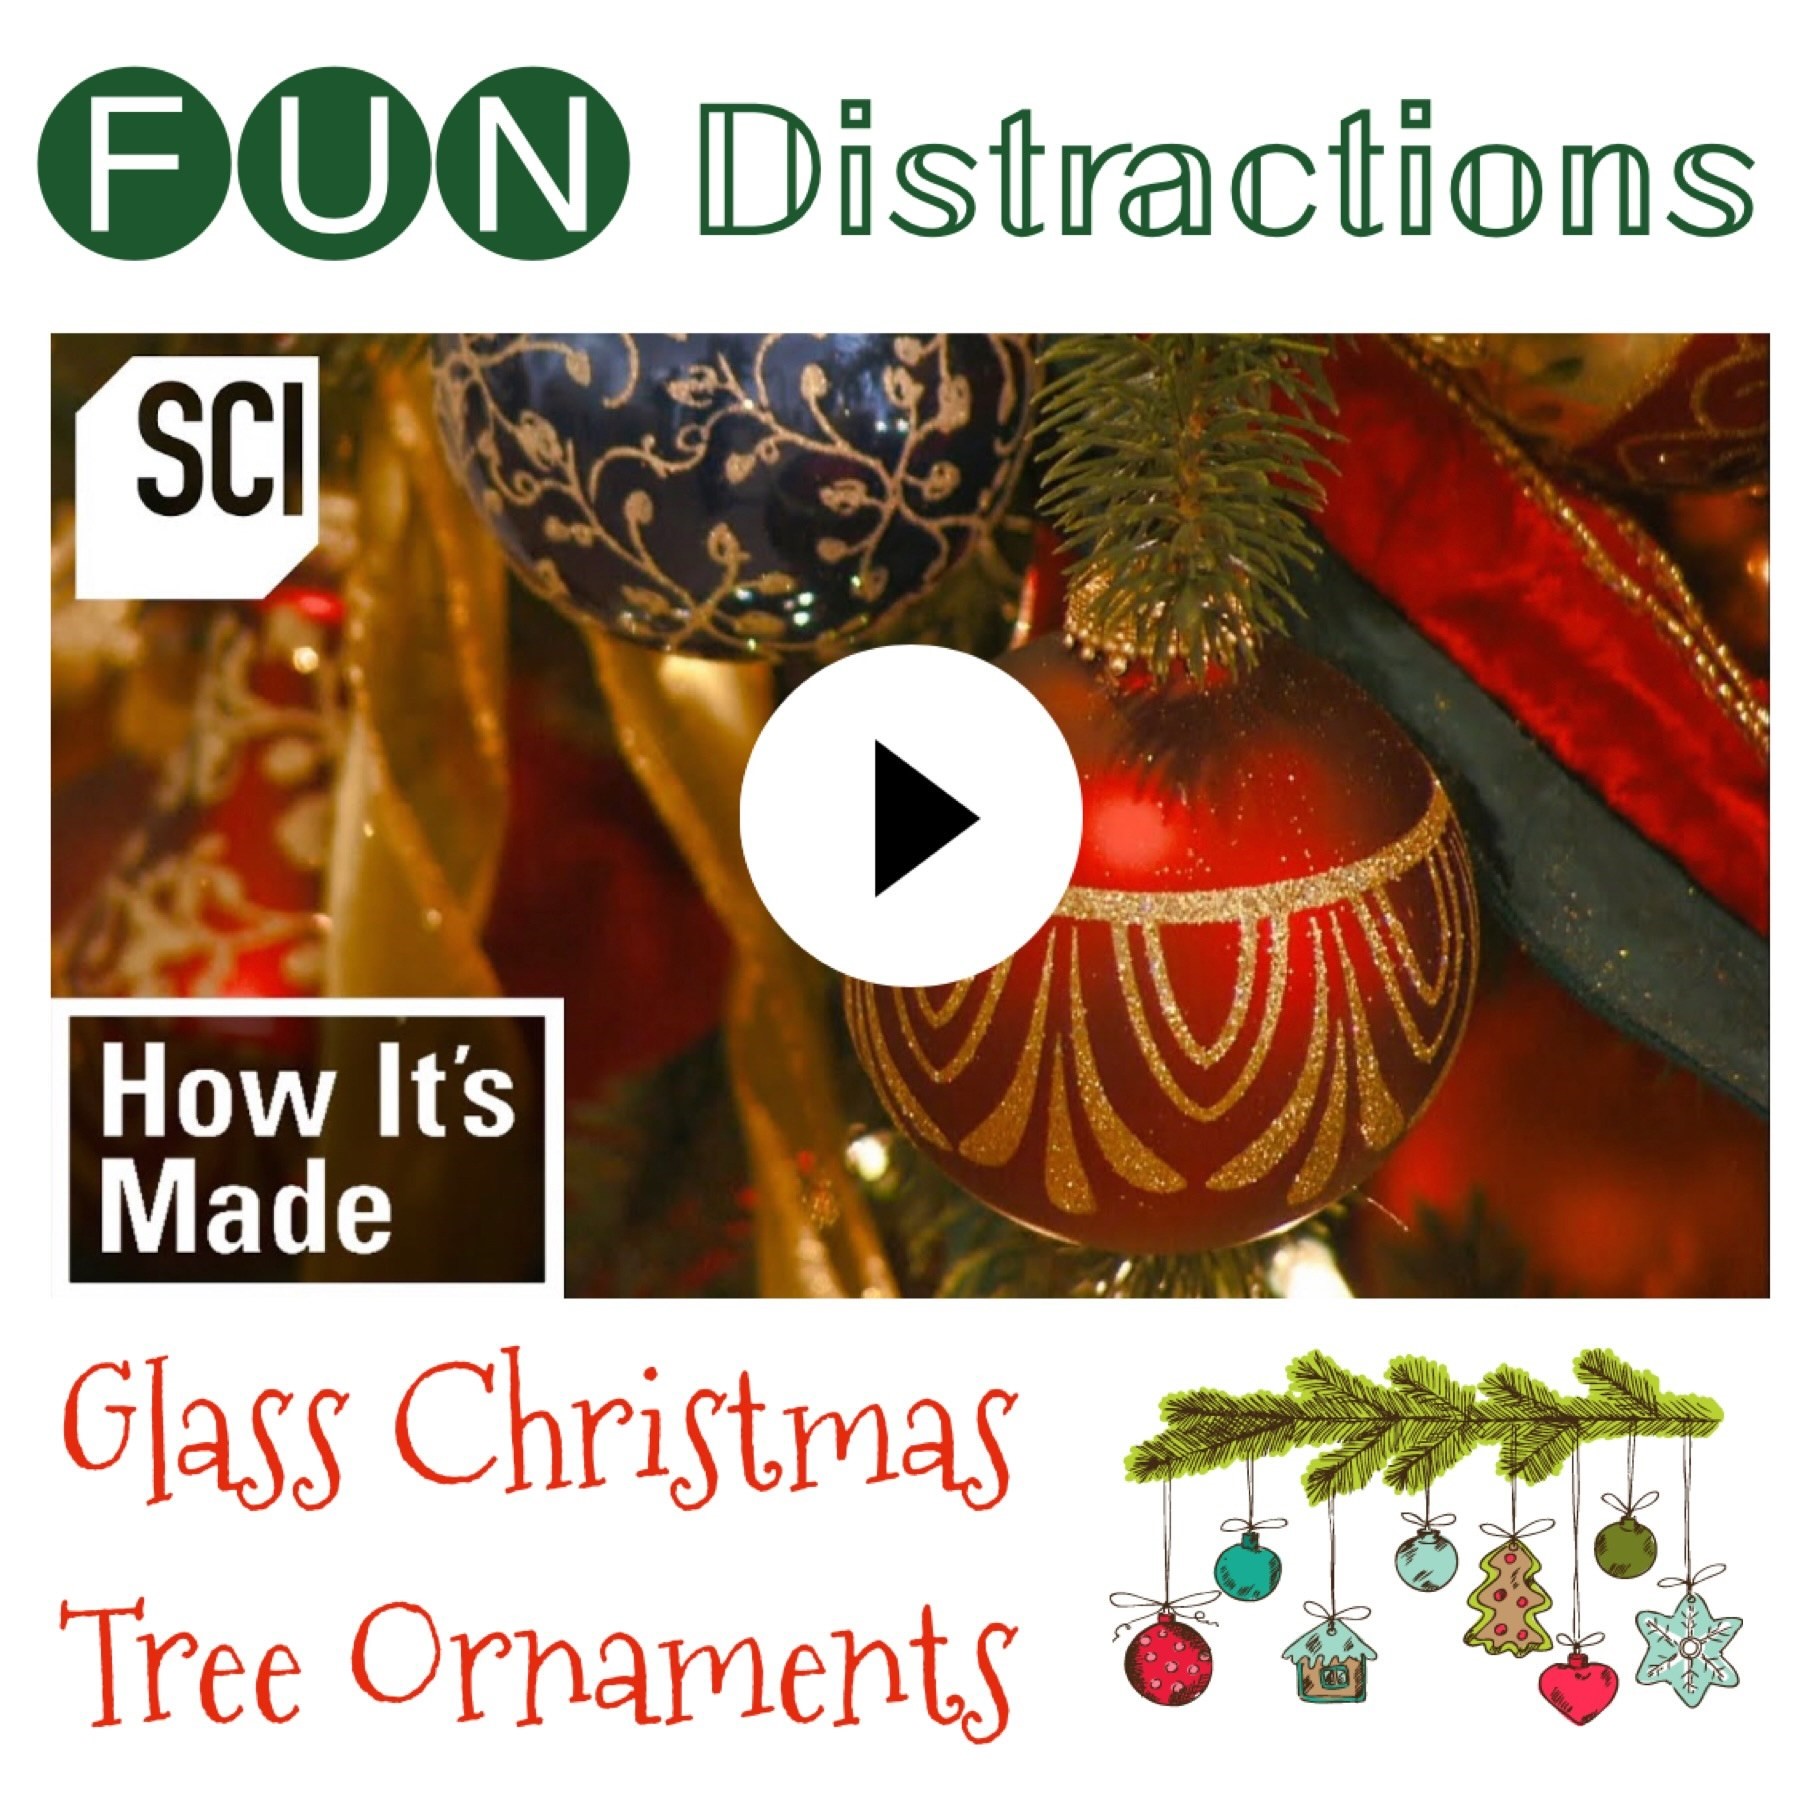 : Image advertising the Library’s FUN Distractions series post on making glass Christmas tree ornaments